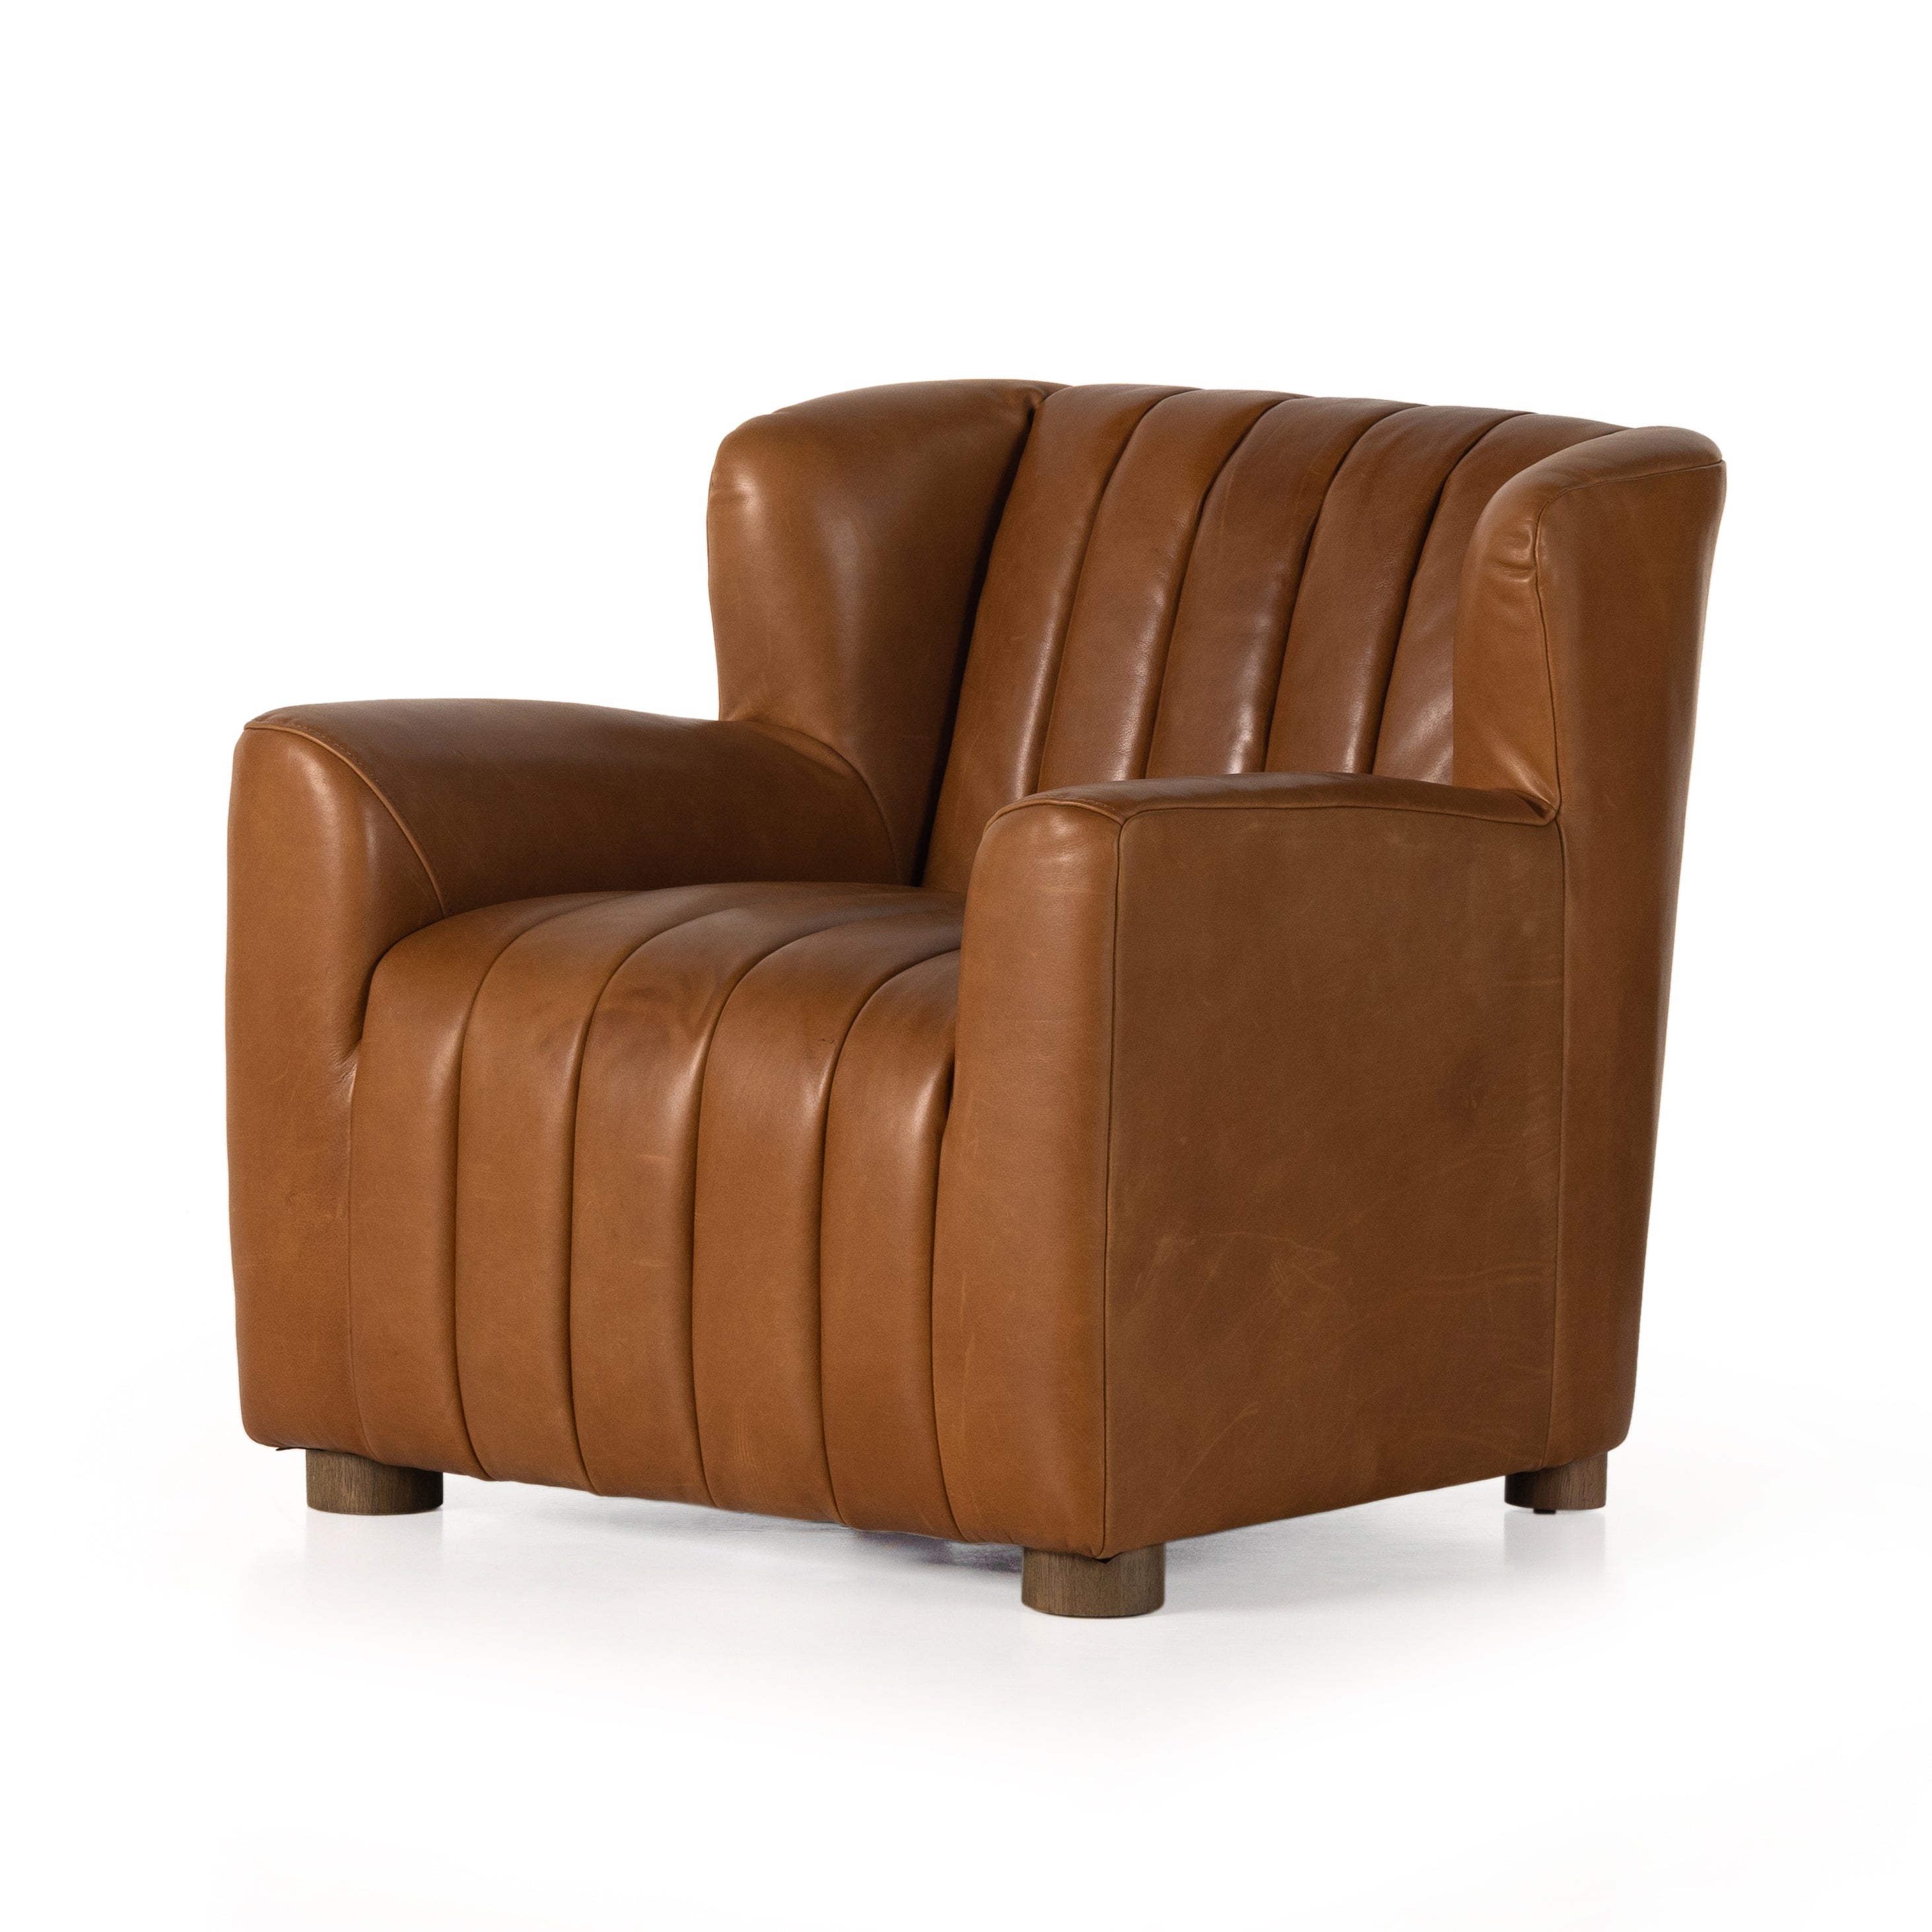 The classic wing-back club chair adopts heavy channeling for an even-comfier sit. Tobacco top-grain leather brings this retro lounge-inspired chair up to modern speed. Amethyst Home provides interior design, new construction, custom furniture, and area rugs in the Tampa metro area.